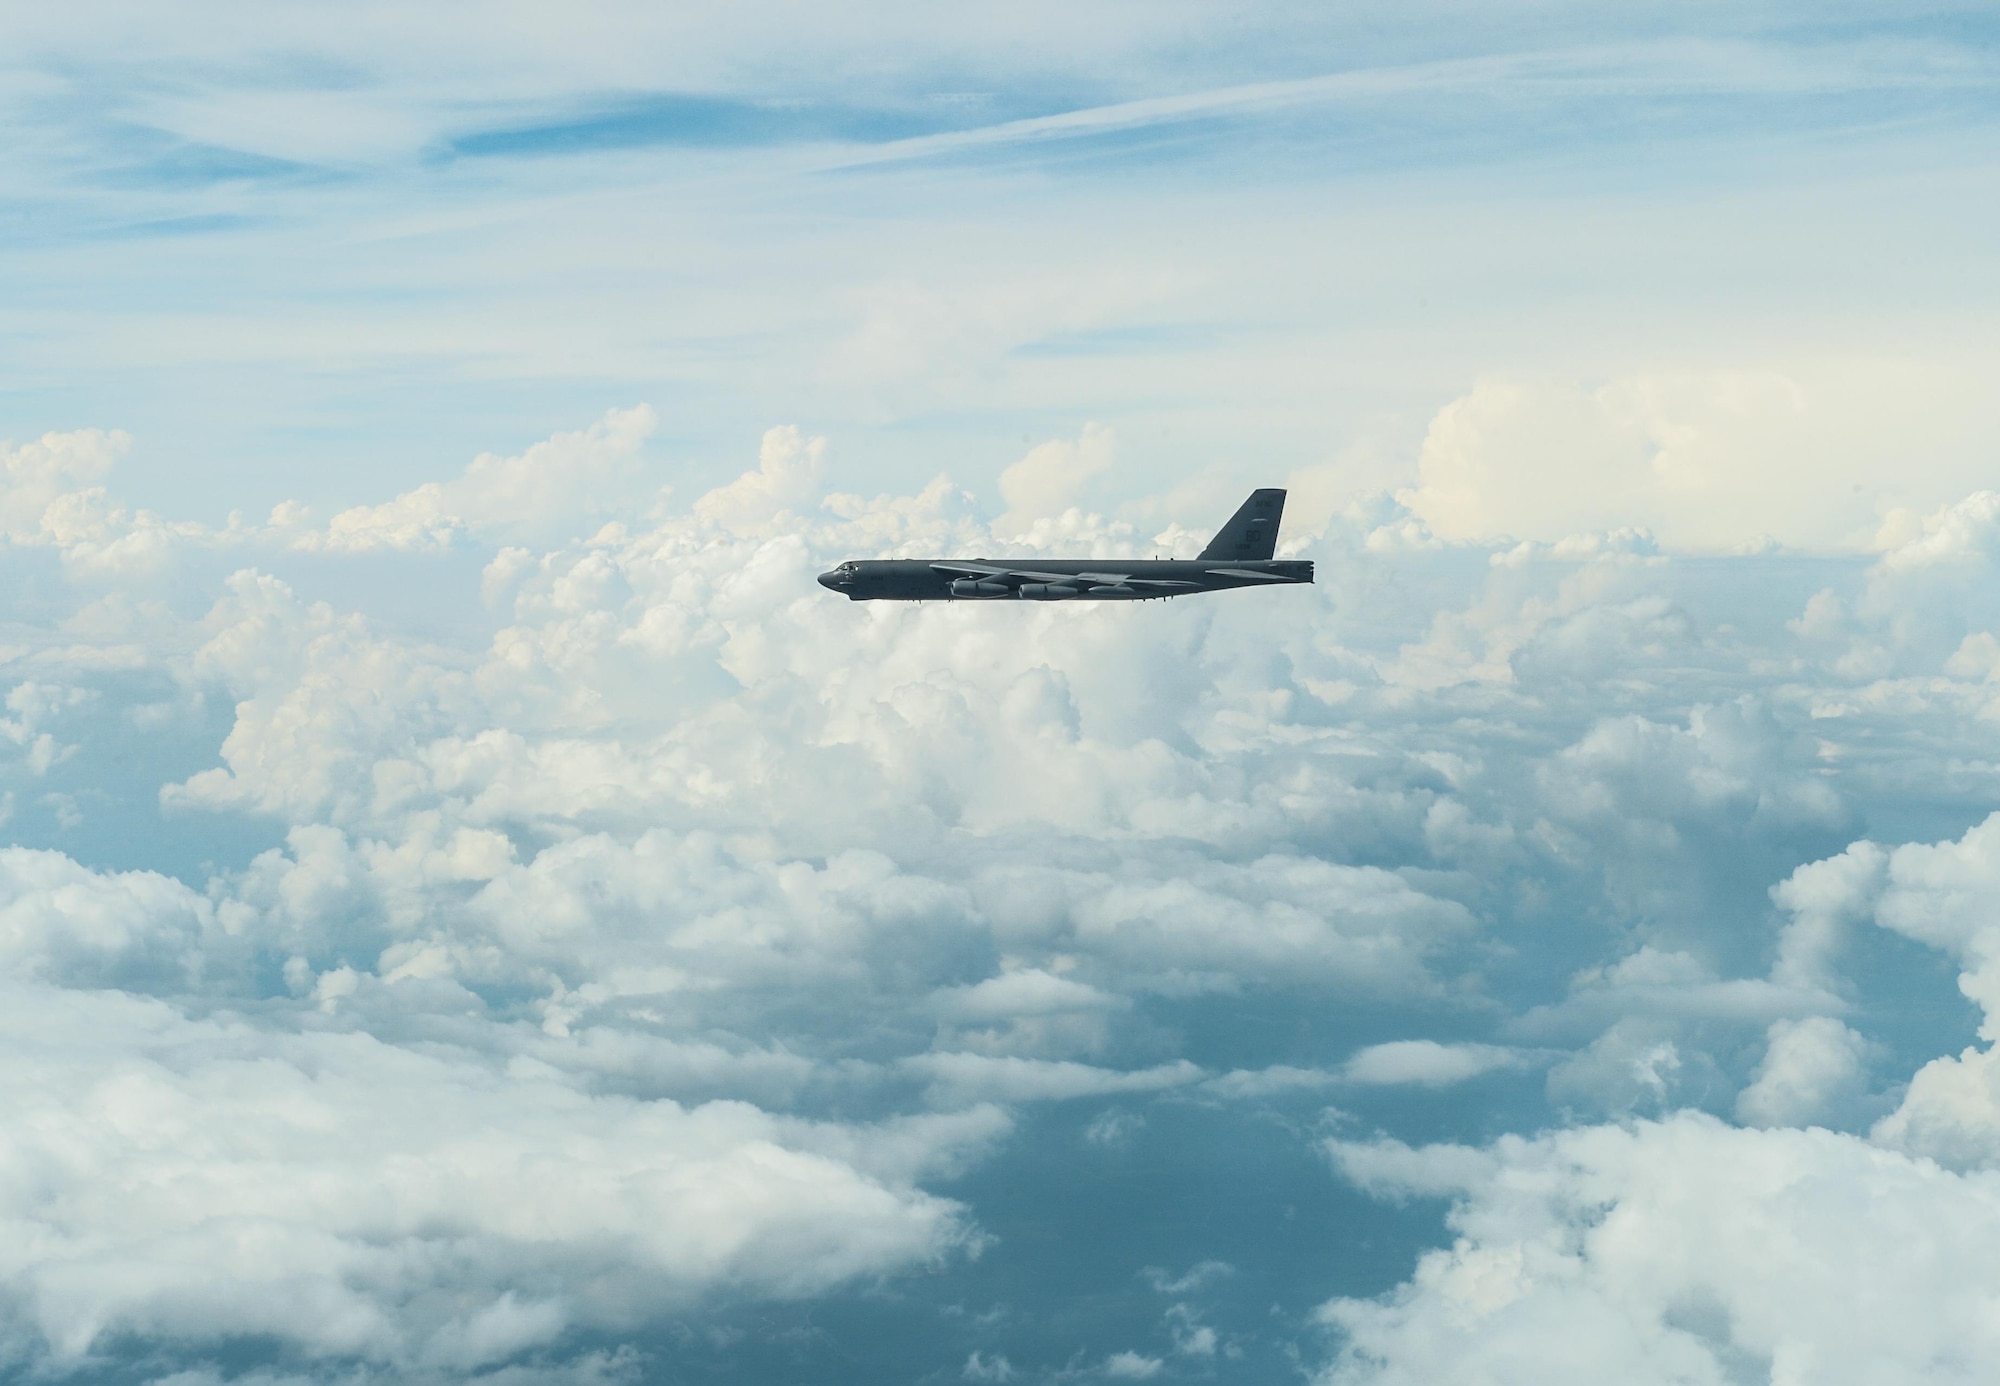 A B-52 Stratofortress from Barksdale Air Force Base, La., soars through the sky over the Gulf of Mexico Oct. 13, 2016. The B-52 was participating in an integration exercise between Barksdale’s 340th Weapons School and the 77th Weapons School, Dyess Air Force Base, Texas. The integration was the capstone event of a six month training course, involving extensive communication planning across more than 10 agencies within the bomber community, followed by a live-fly exercise. (U.S. Air Force photo/Senior Airman Curt Beach)